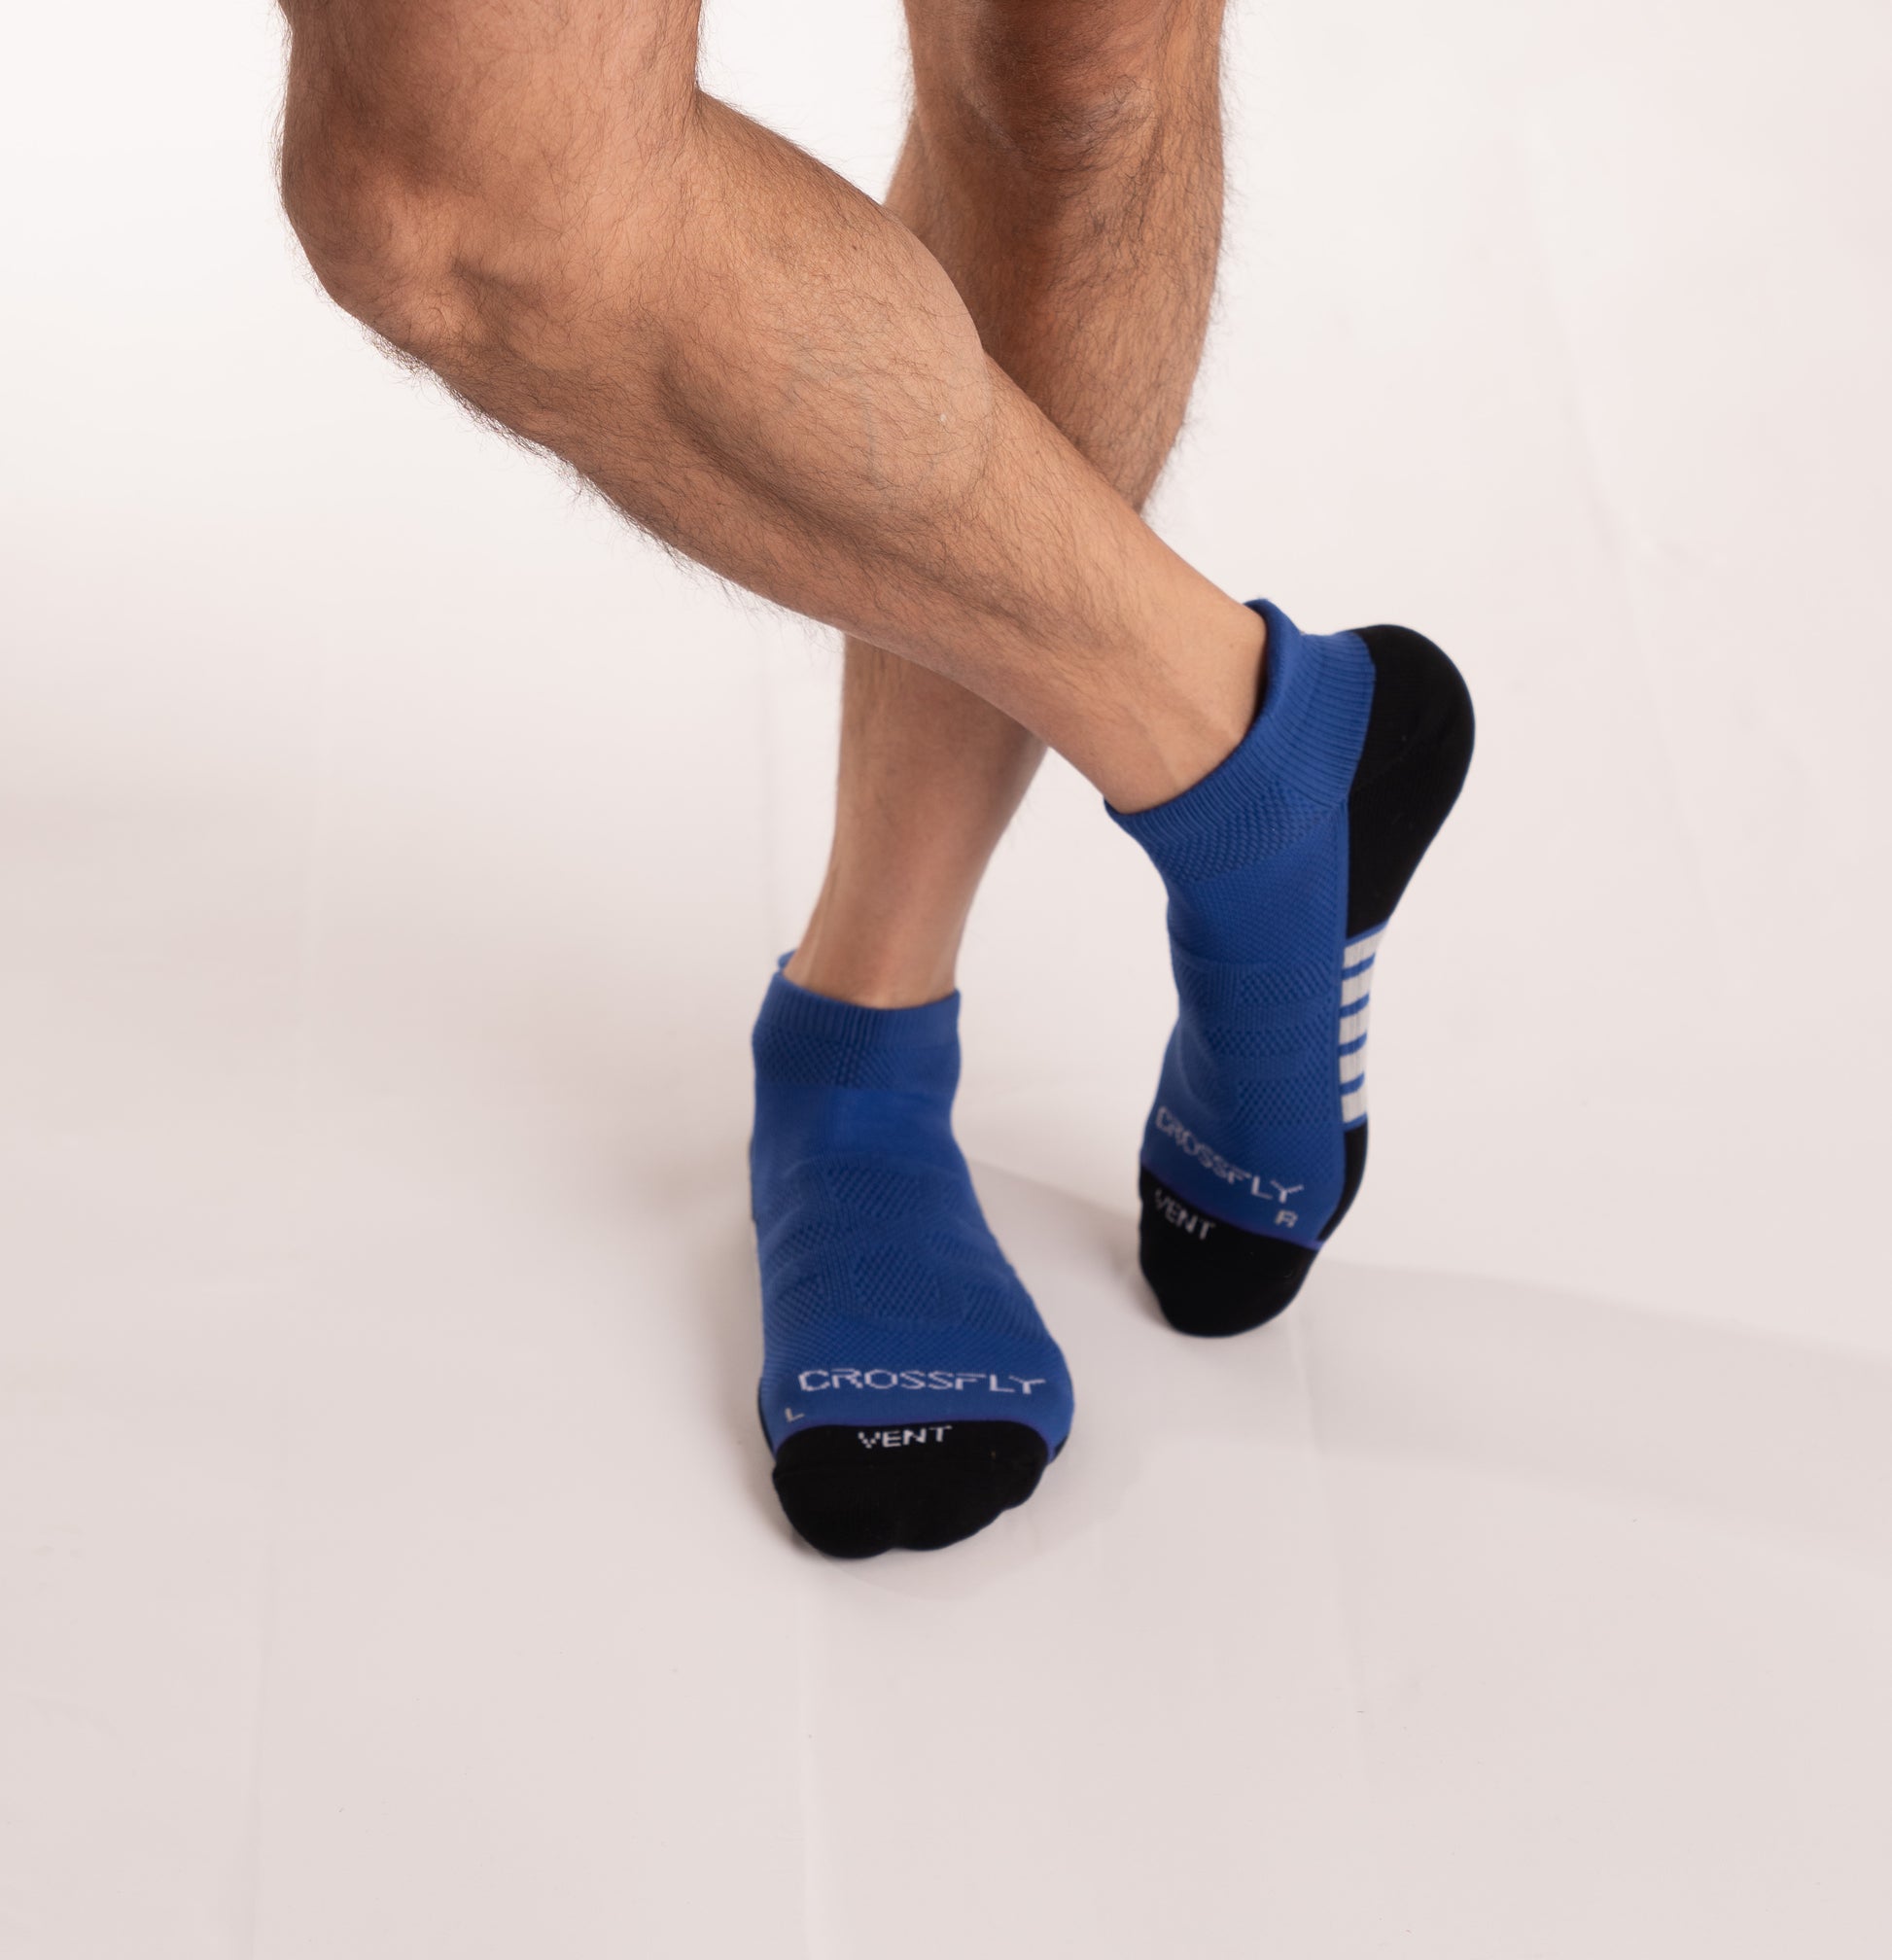 Crossfly men's Vent Low Socks in royal / black from the Performance series, featuring AirVent and AirBeams.